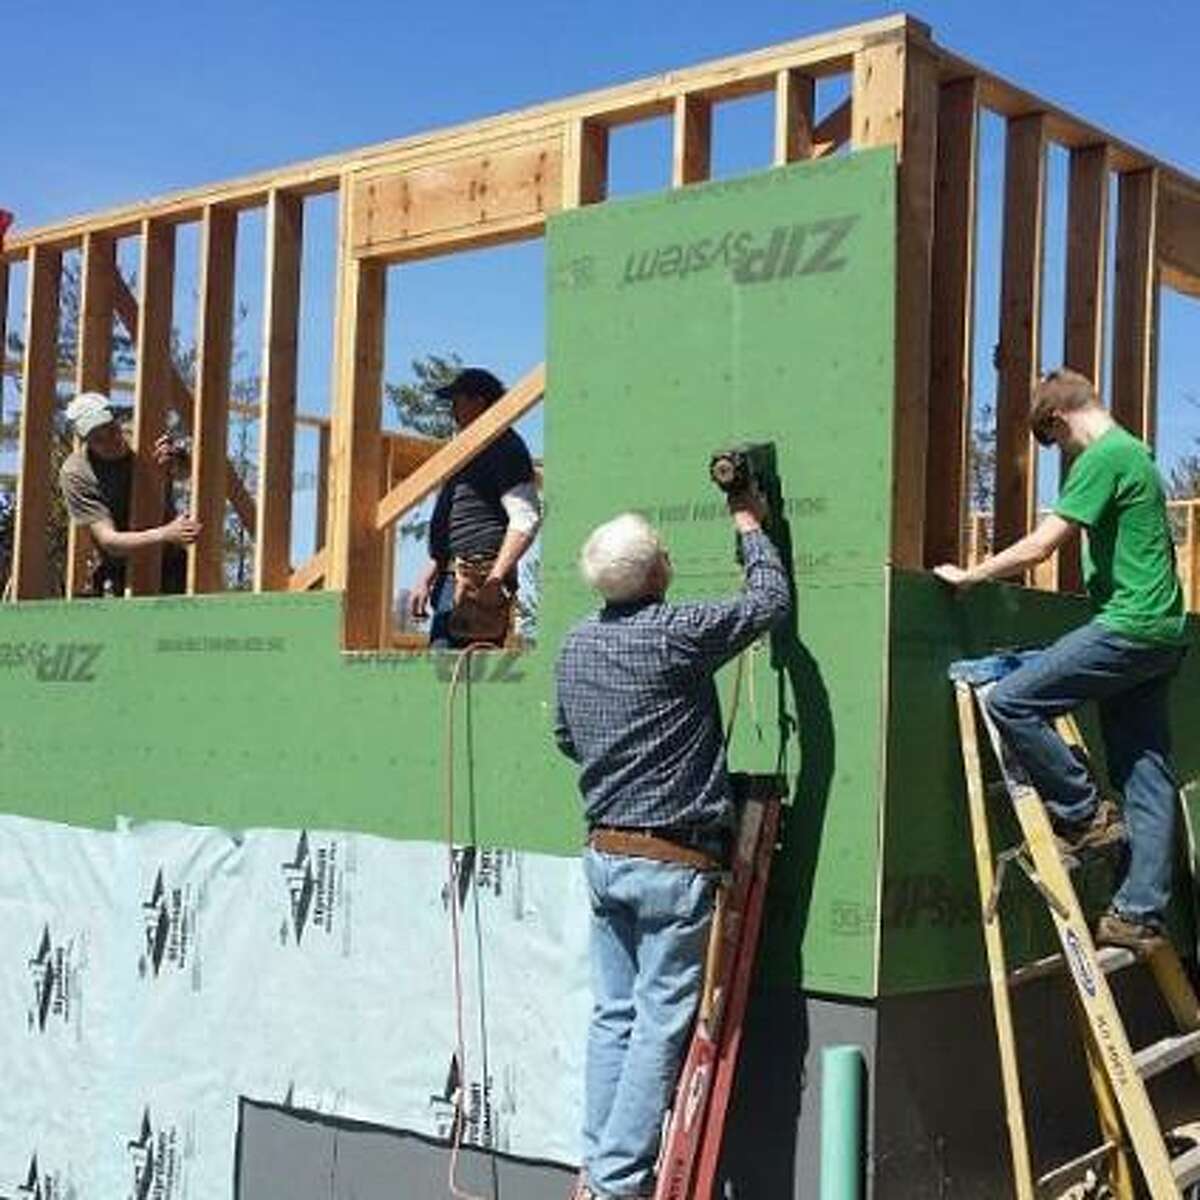 Above, volunteers work on a Habitat for Humanity house.